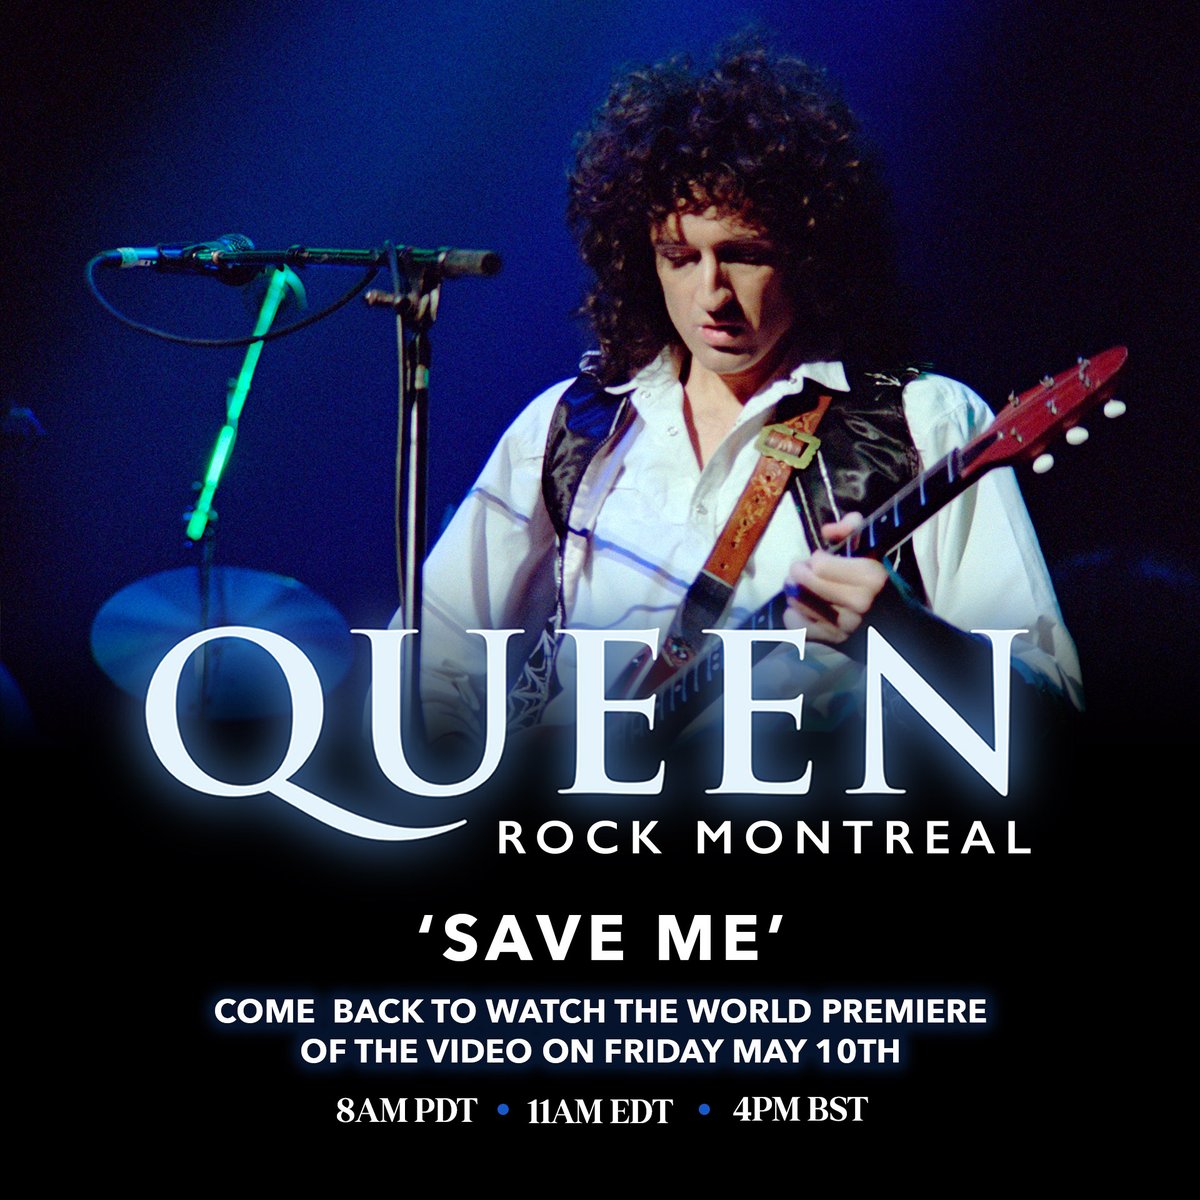 🚨 Coming Soon…Queen - Save Me, Live at the Montreal Forum, 1981 🎸 ⏰ This Friday, 10th May at 4PM BST / 8AM PDT / 11AM EDT. Subscribe here ➡️ queen.lnk.to/SubscribeQRM #QueenRockMontreal